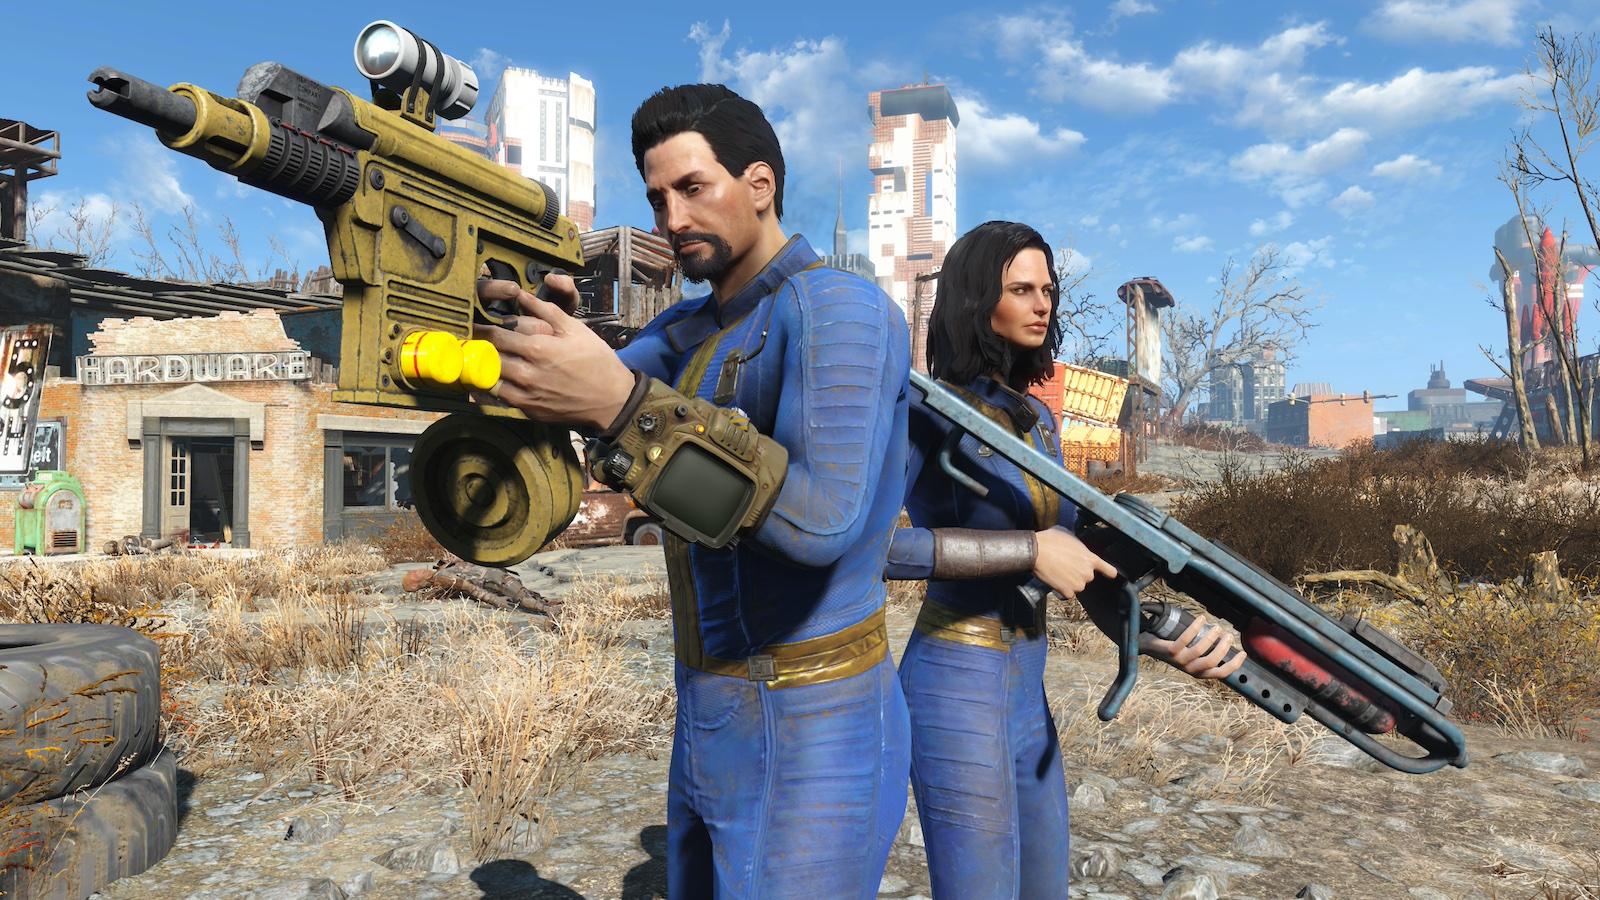 Fallout 4 characters standing together with weapons